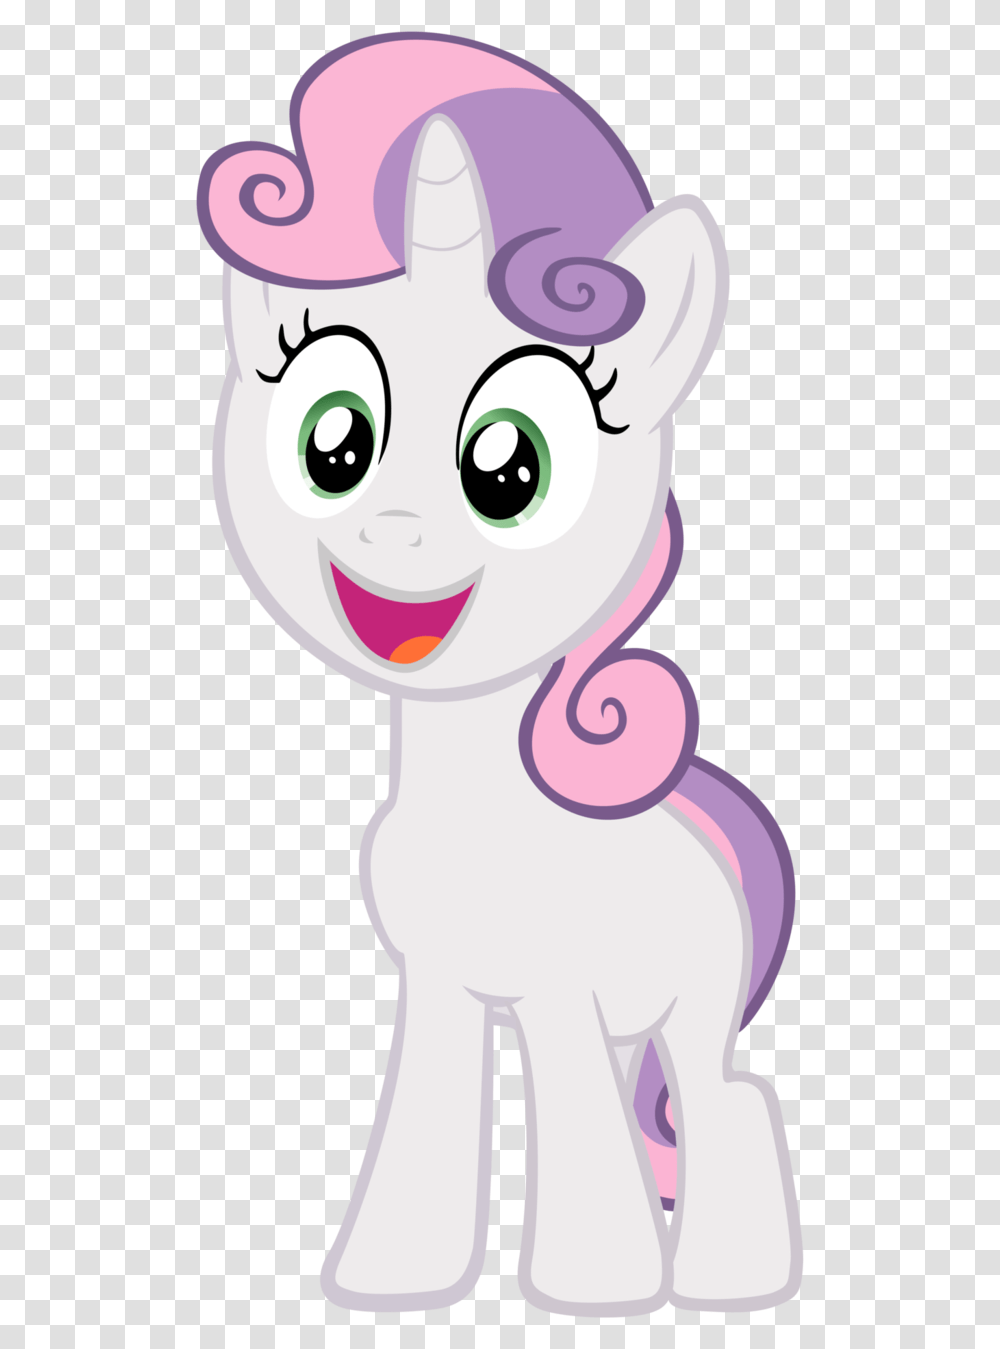 Sweetie Belle Pony Pink Cartoon Purple Mammal Fictional Sweetie Belle Yay, Face, Head, Animal Transparent Png